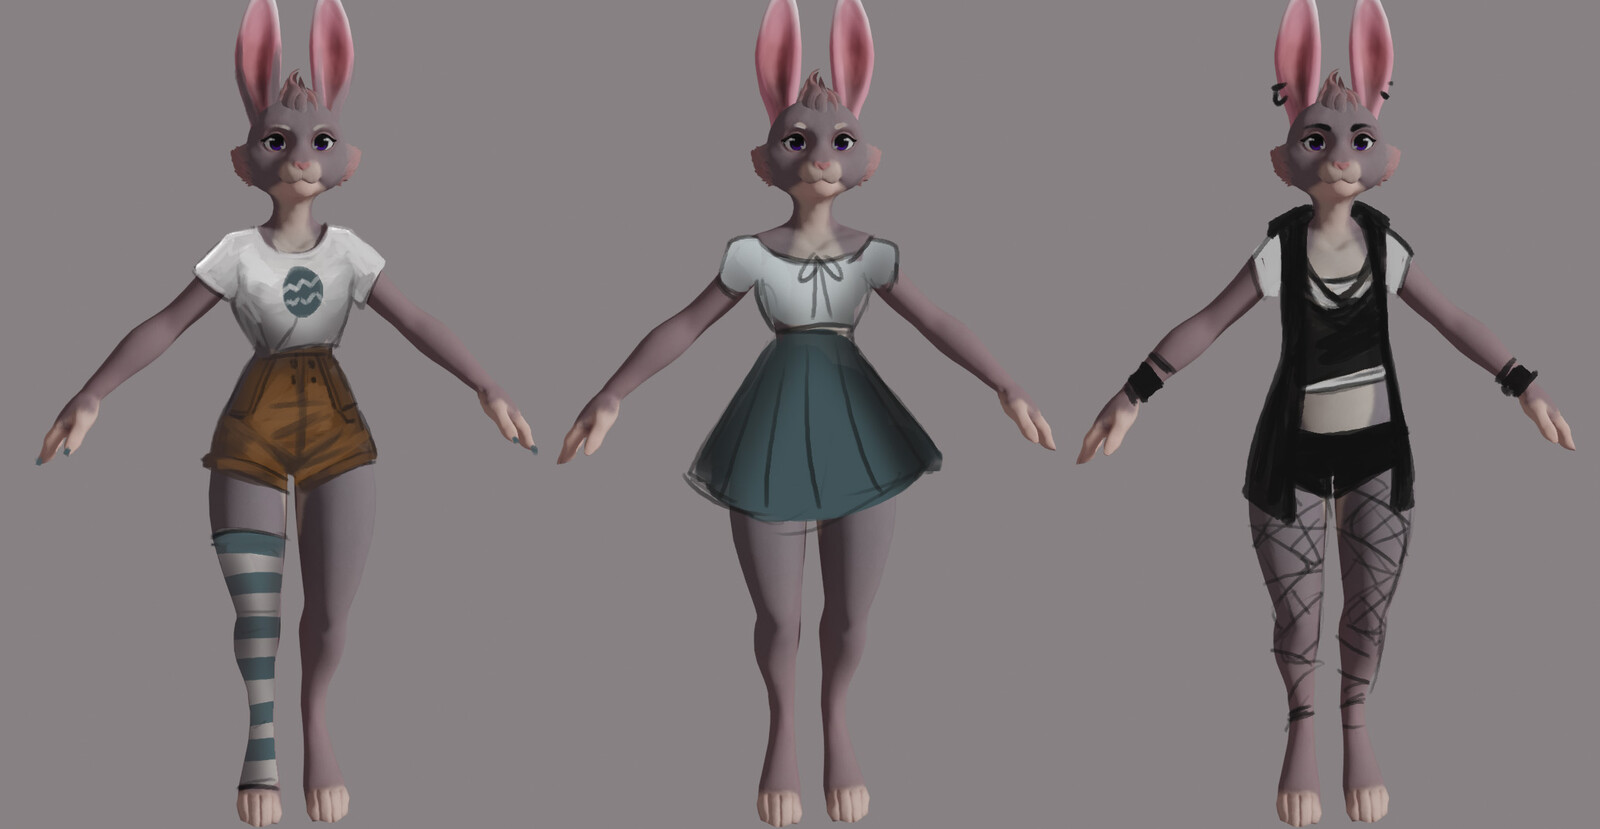 Some clothing ideas if users feel like doing a zootopia style mod